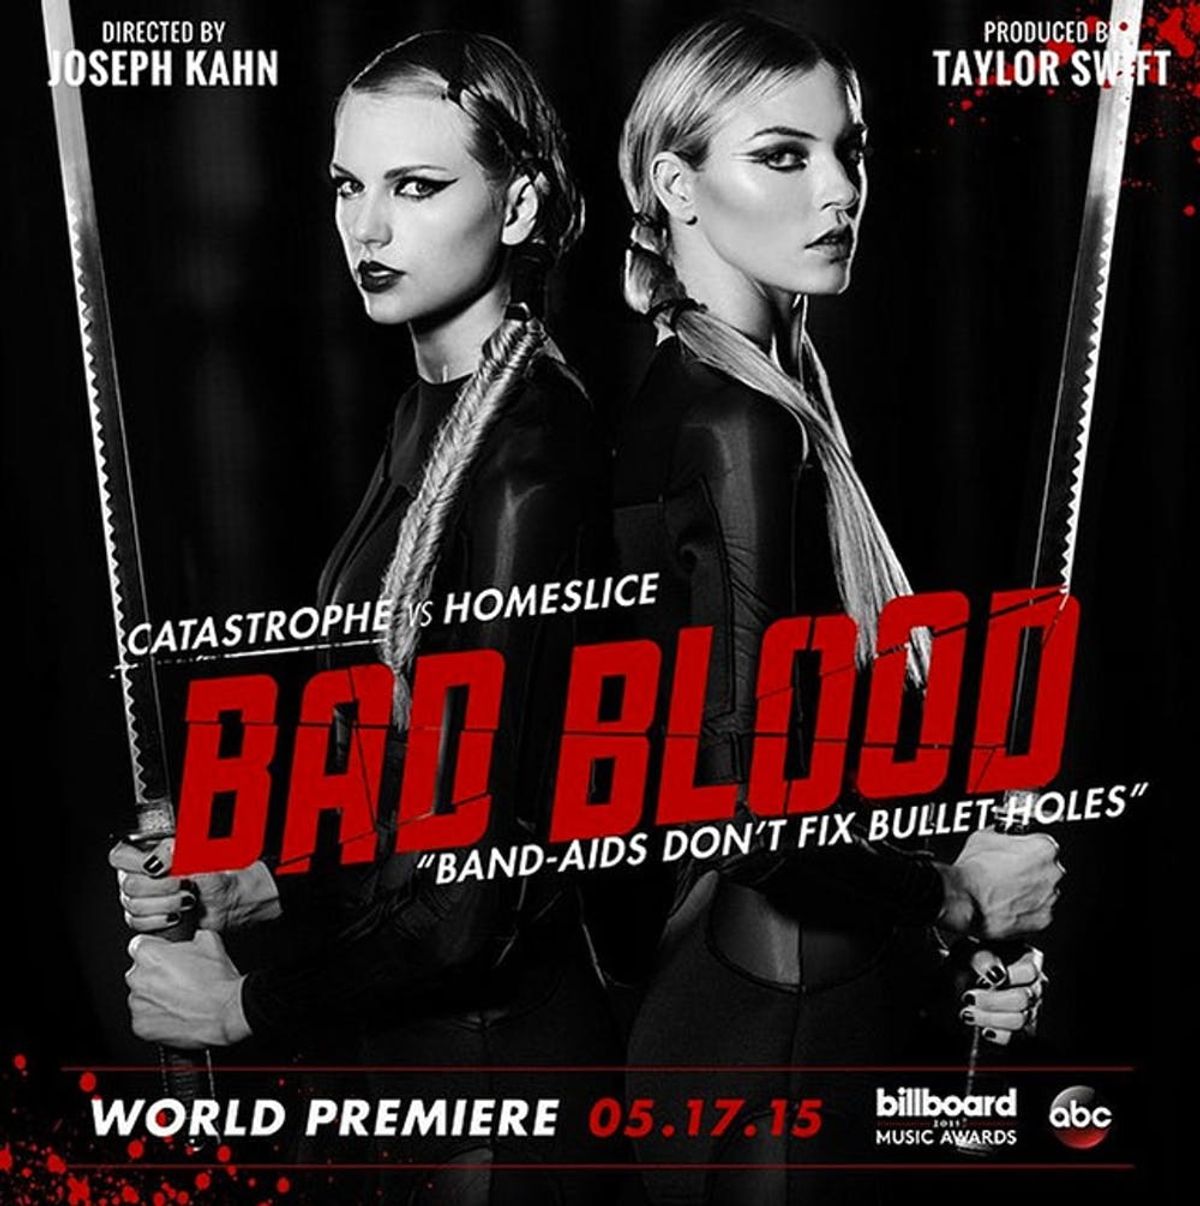 12 Ways to Dress like You’re in Taylor Swift’s Bad Blood Girl Gang